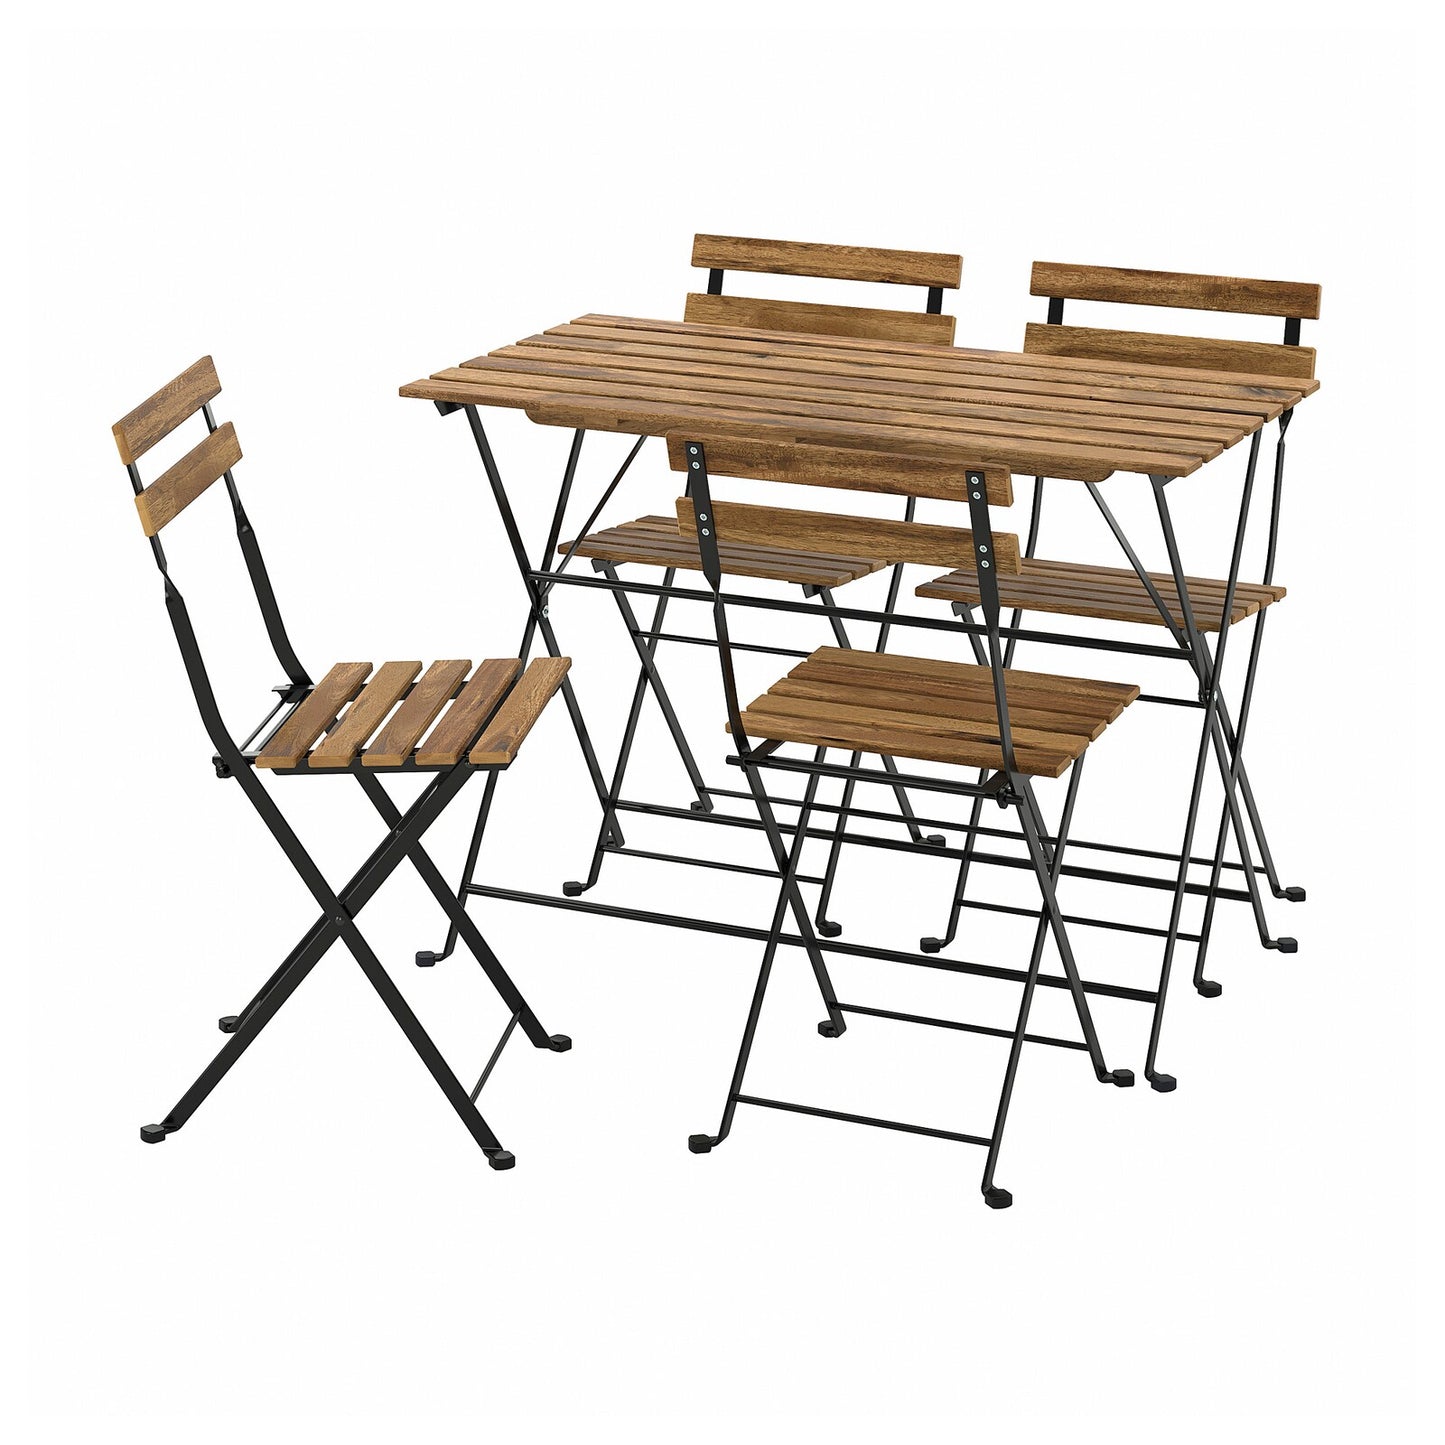 Tarno Table and 4 chairs, outdoor, black/light brown stained